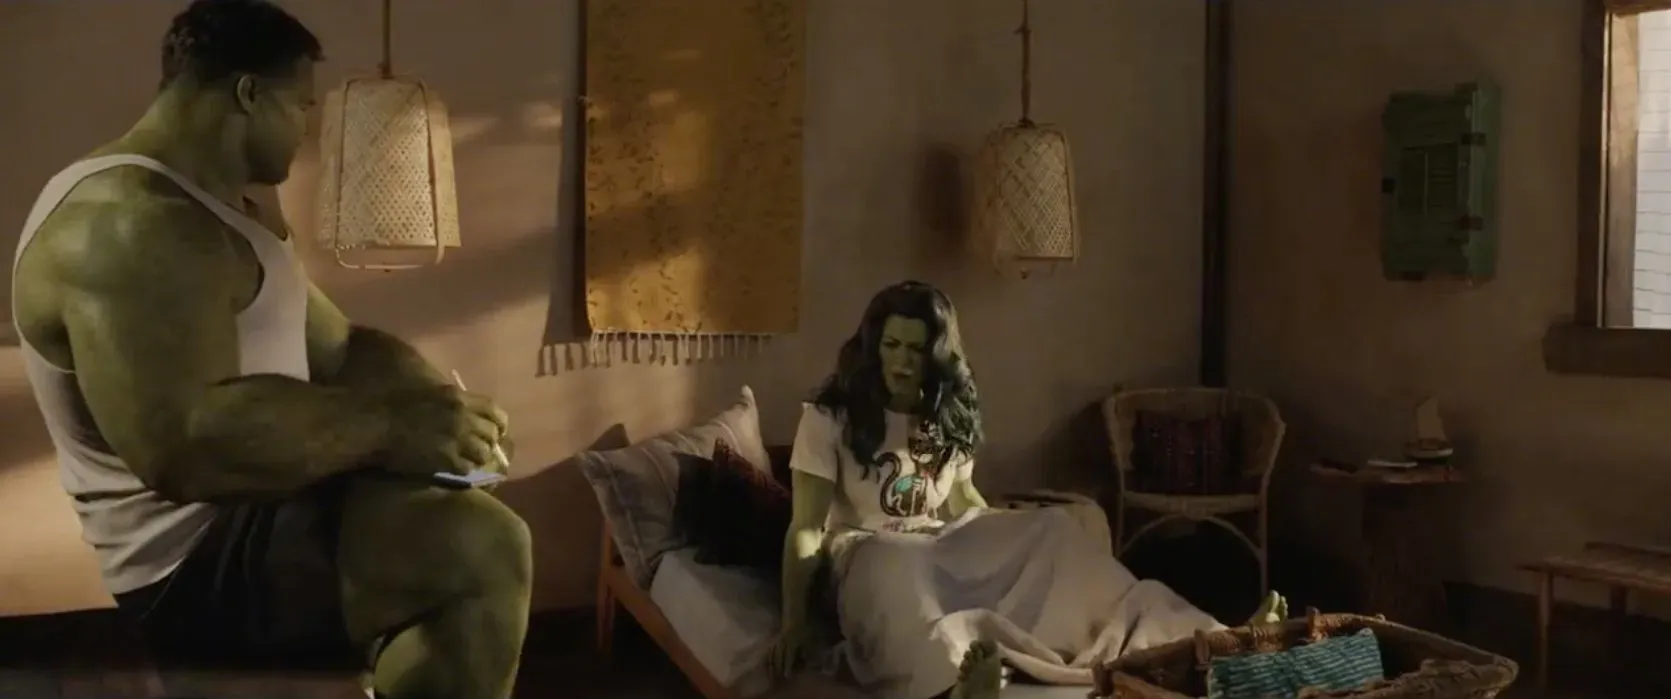 Marvel's "She-Hulk" reveals new trailers and posters, Daredevil surprise cameo | FMV6